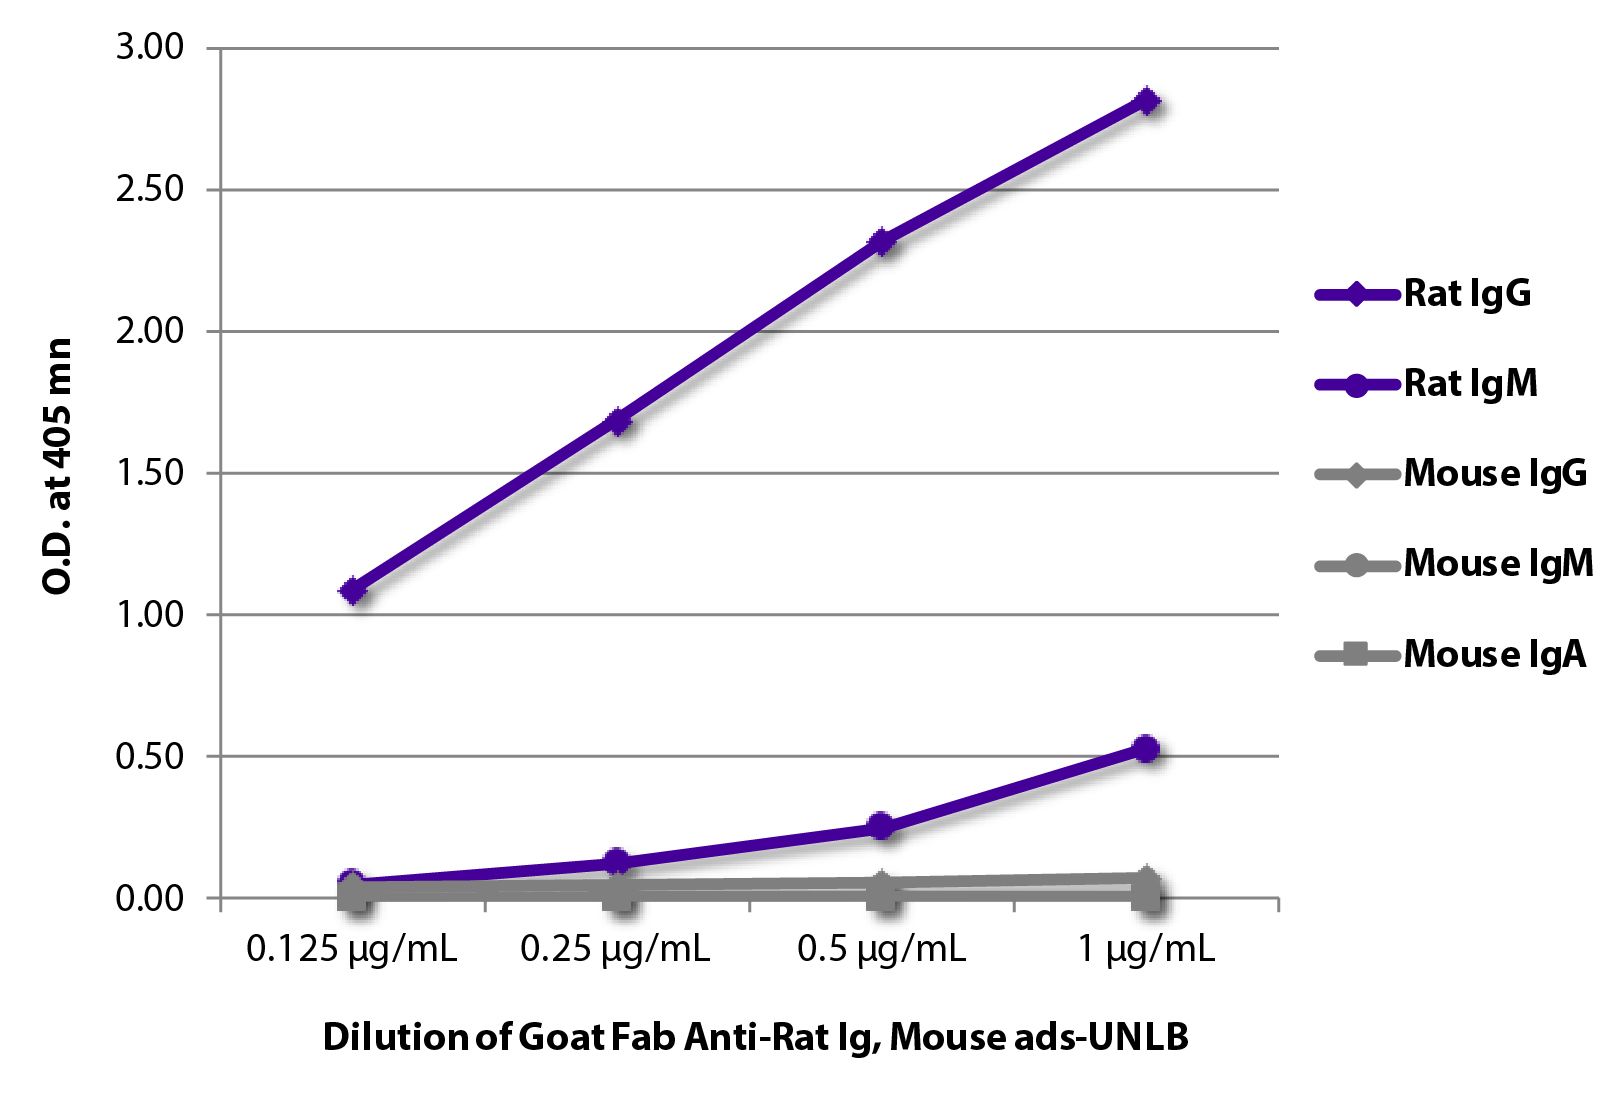 ELISA plate was coated with purified rat IgG and IgM and mouse IgG, IgM, and IgA.  Immunoglobulins were detected with serially diluted Goat Fab Anti-Rat Ig, Mouse ads-UNLB (SB Cat. No. 3000-01) followed by Swine Anti-Goat IgG(H+L), Human/Rat/ Mouse SP ads-HRP (SB Cat. No. 6300-05).